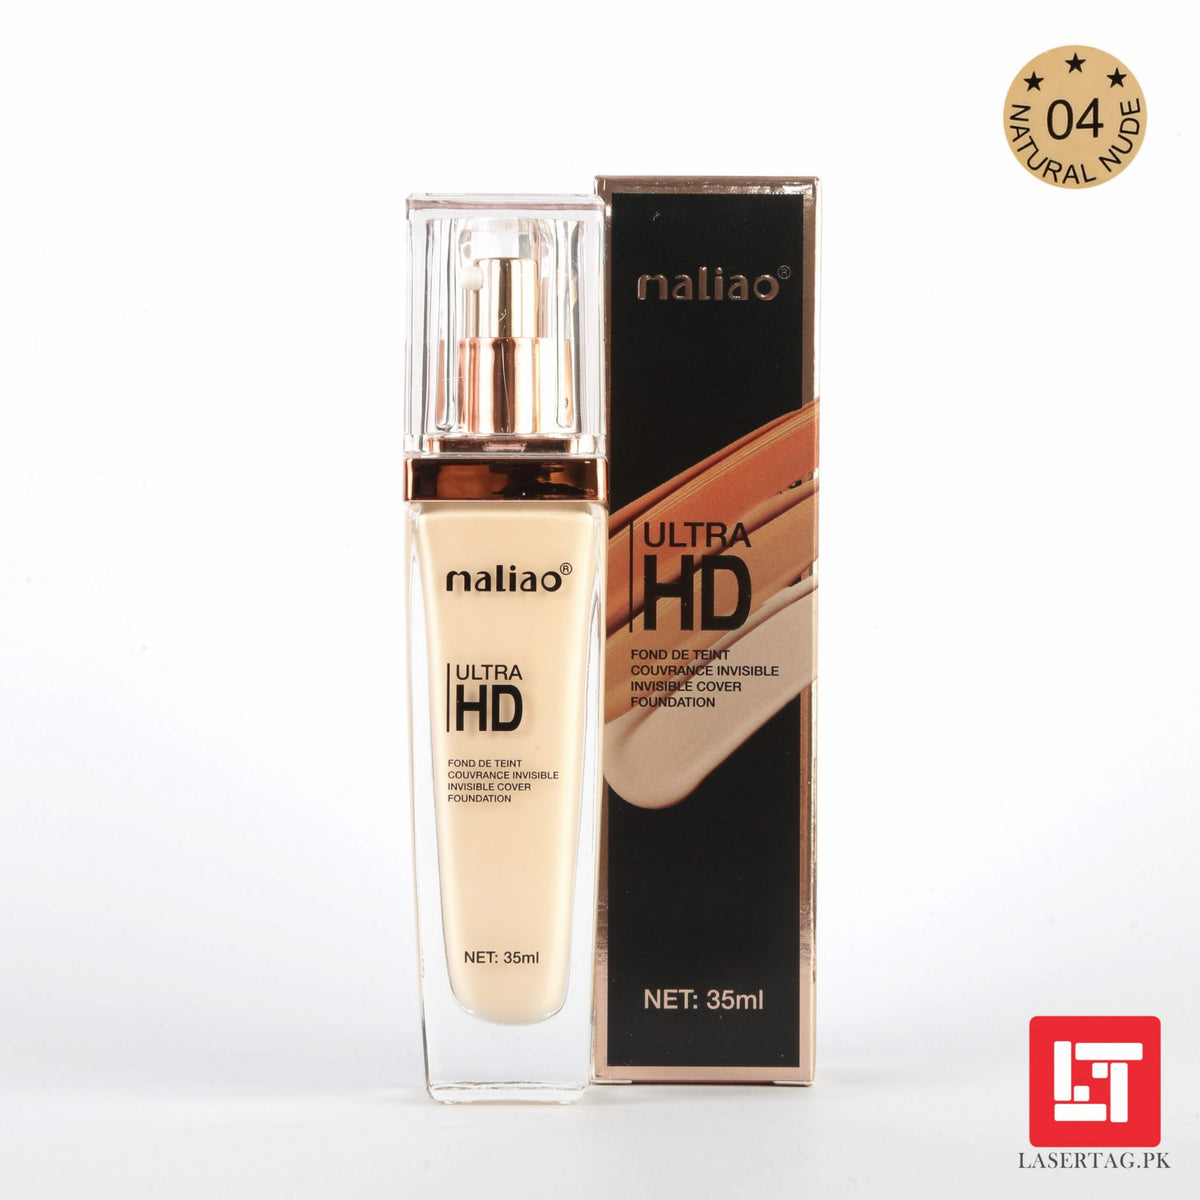 Maliao Ultra HD Invisible Cover Foundation Natural Nude M217-04 35ml freeshipping - lasertag.pk